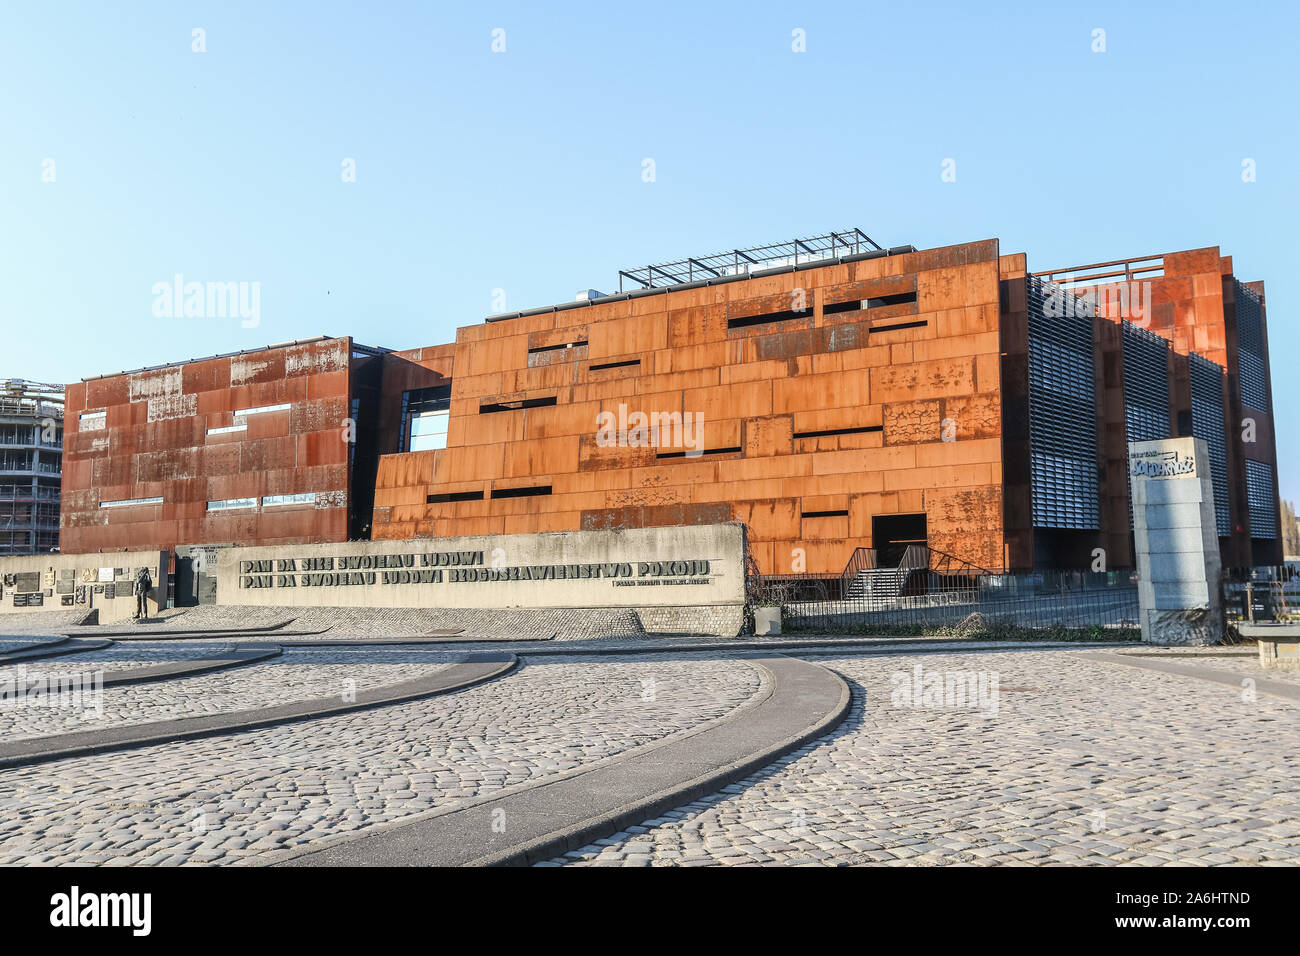 ECS (European Solidarity Centre) building on the Solidarity Square in front of historical Gdansk Shipyar  is seen in Gdansk, Poland on 6 April 2019  © Michal Fludra / Alamy Live News Stock Photo